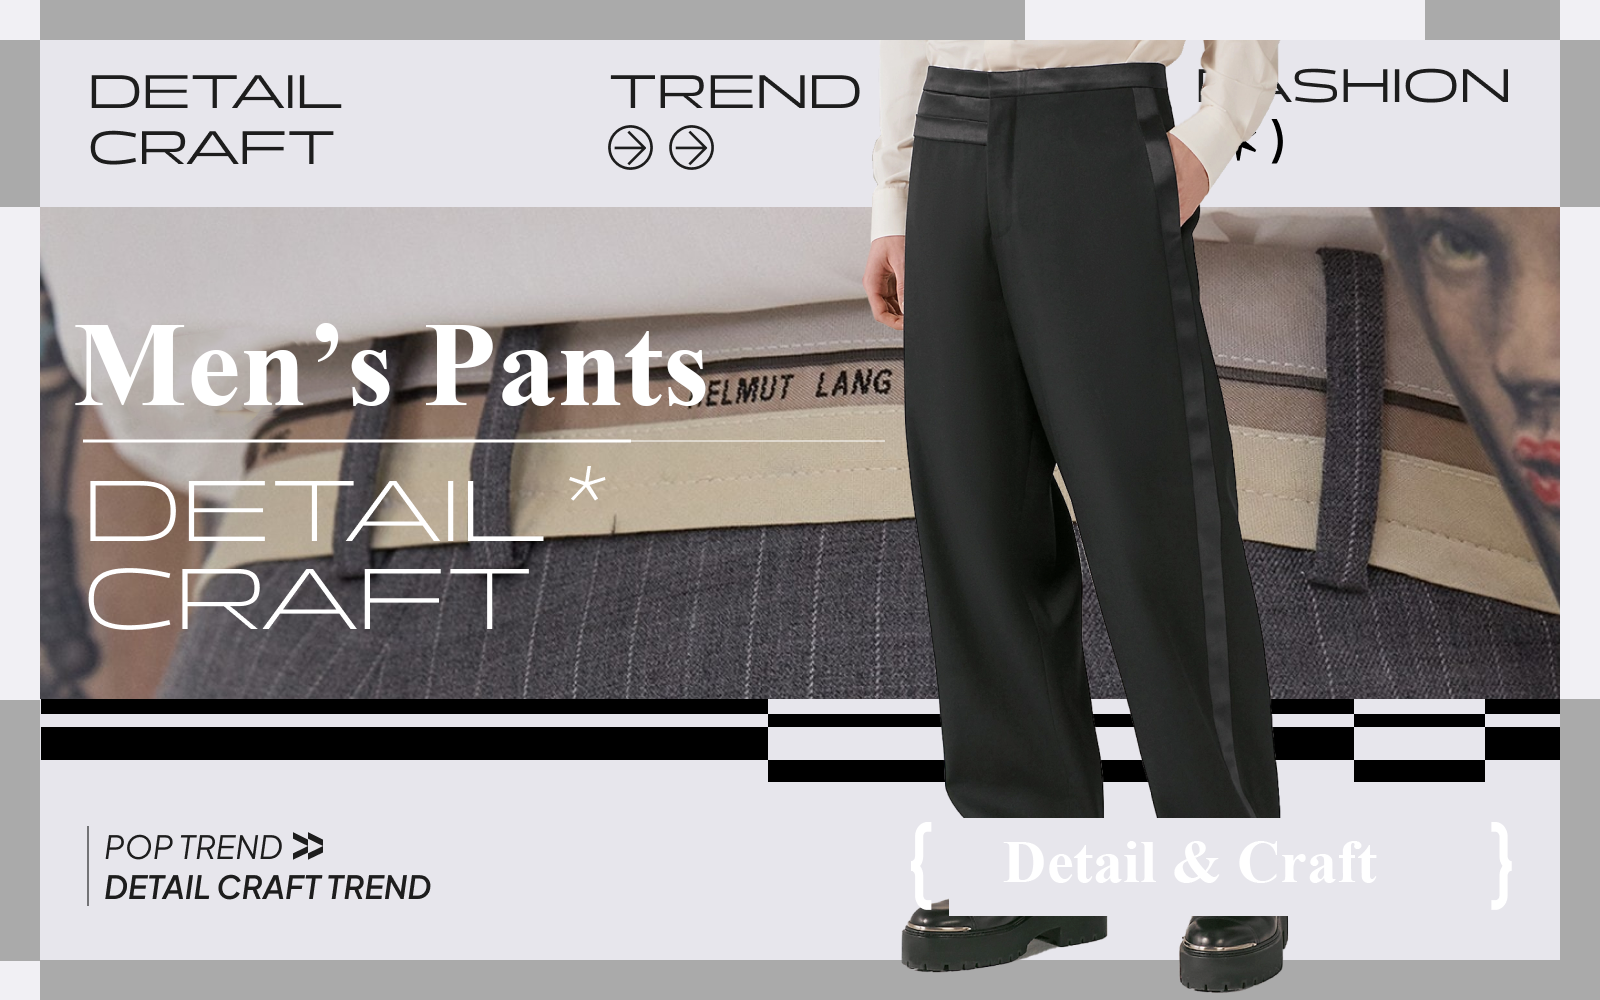 Commuter Guide -- The Detail & Craft Trend for Men's Pants